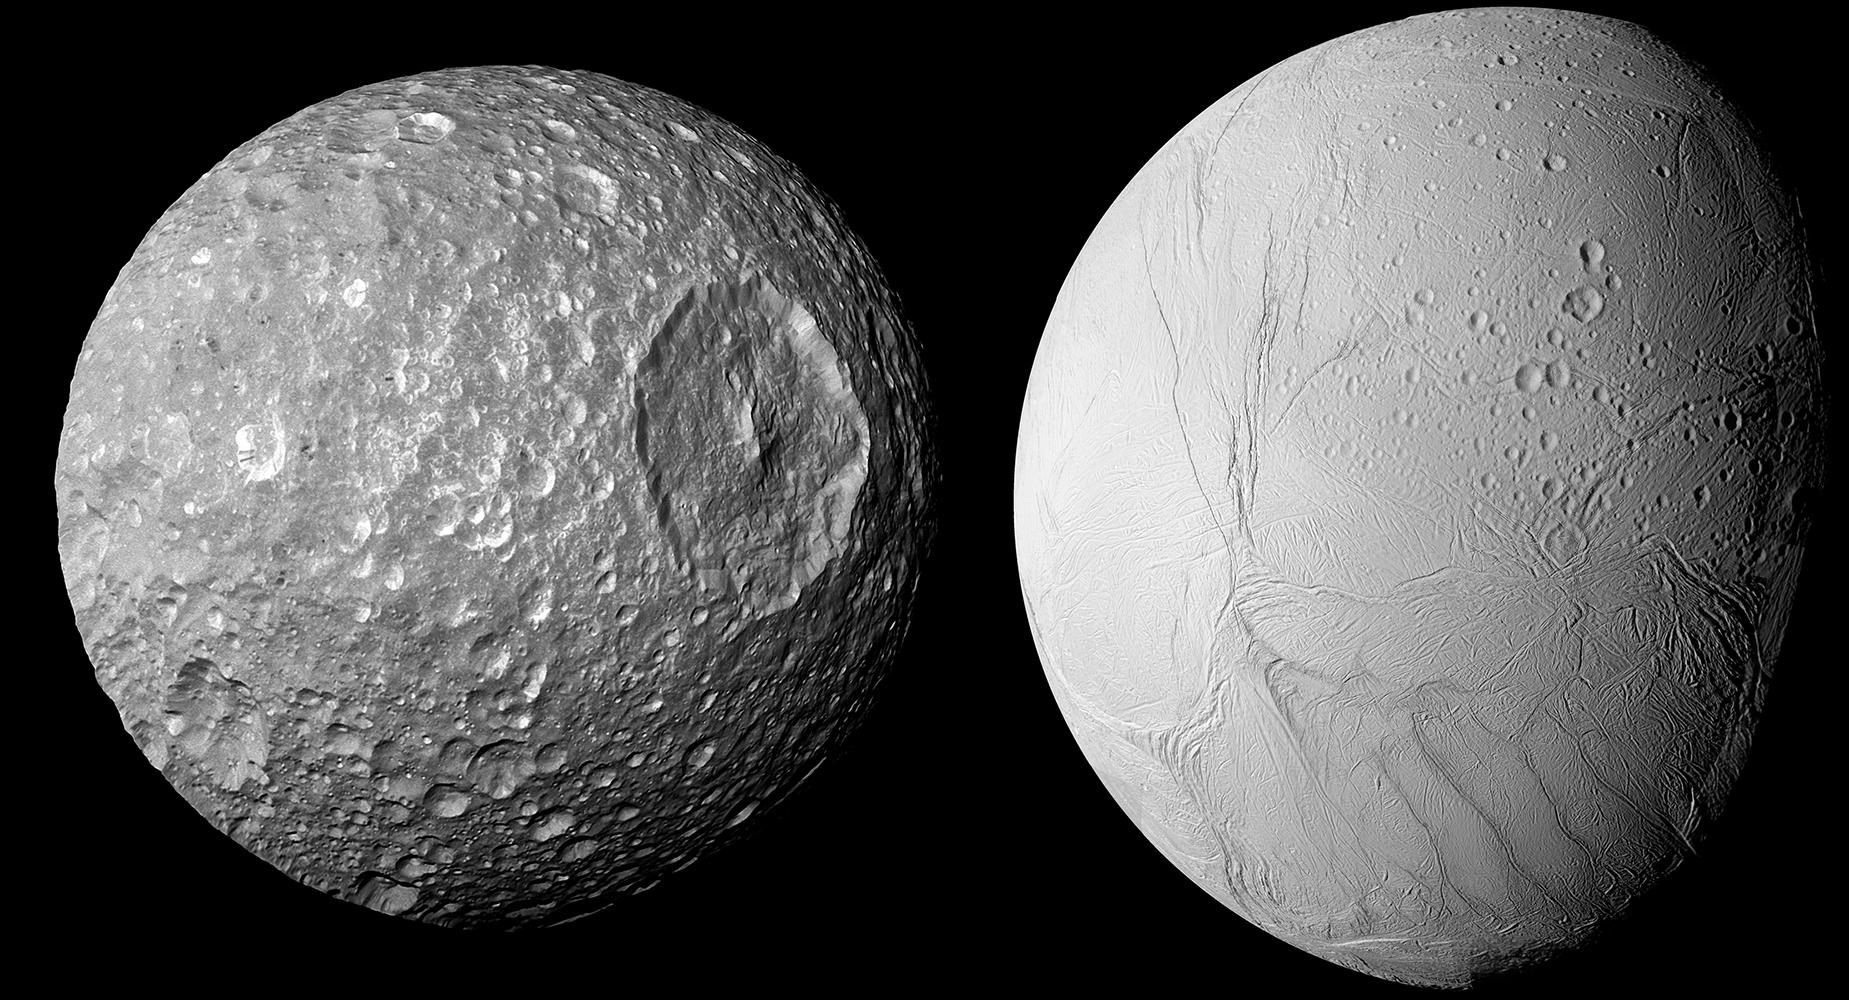 An SwRI scientist has discovered that Saturn’s small moon Mimas (left) likely has something in common with its larger neighbor Enceladus: an internal ocean beneath a thick icy surface. Image Credit: NASA / JPL-Caltech / Space Science Institute.